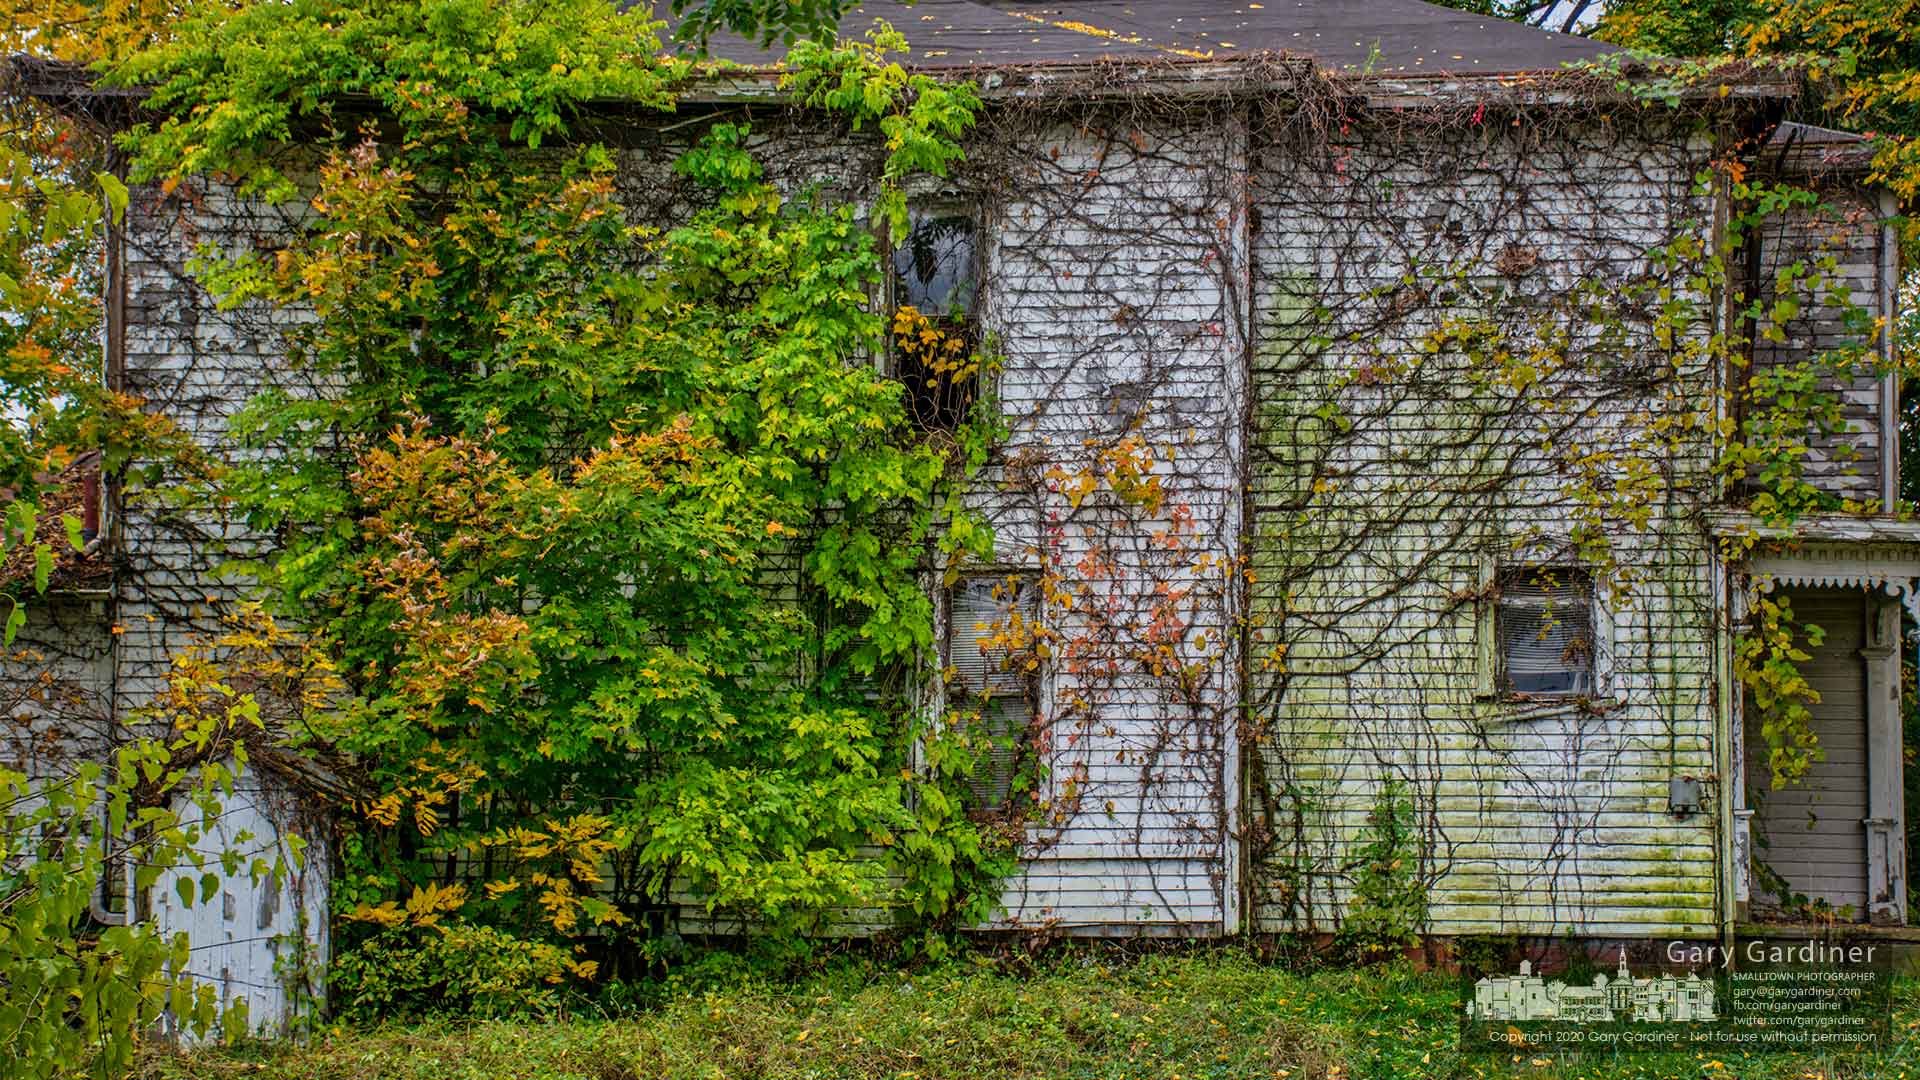 The abandoned farmhouse on the Braun Farm wears a covering of vines slowly abandoning their green summer colors for the bold colors of fall before falling dormant for the winter.